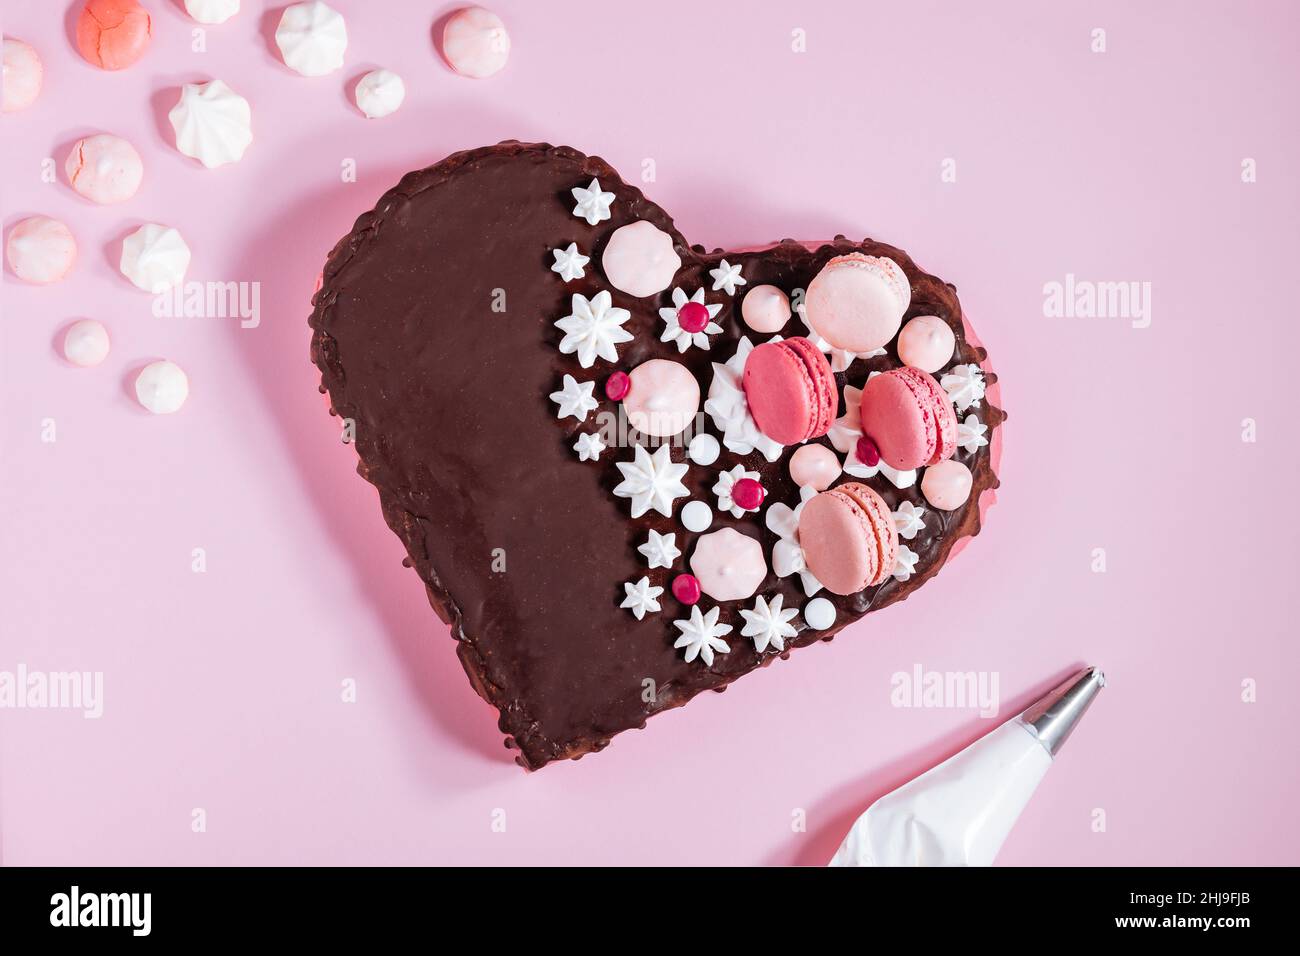 Top view of Pink heart shaped cake with chocolate glaze, meringues